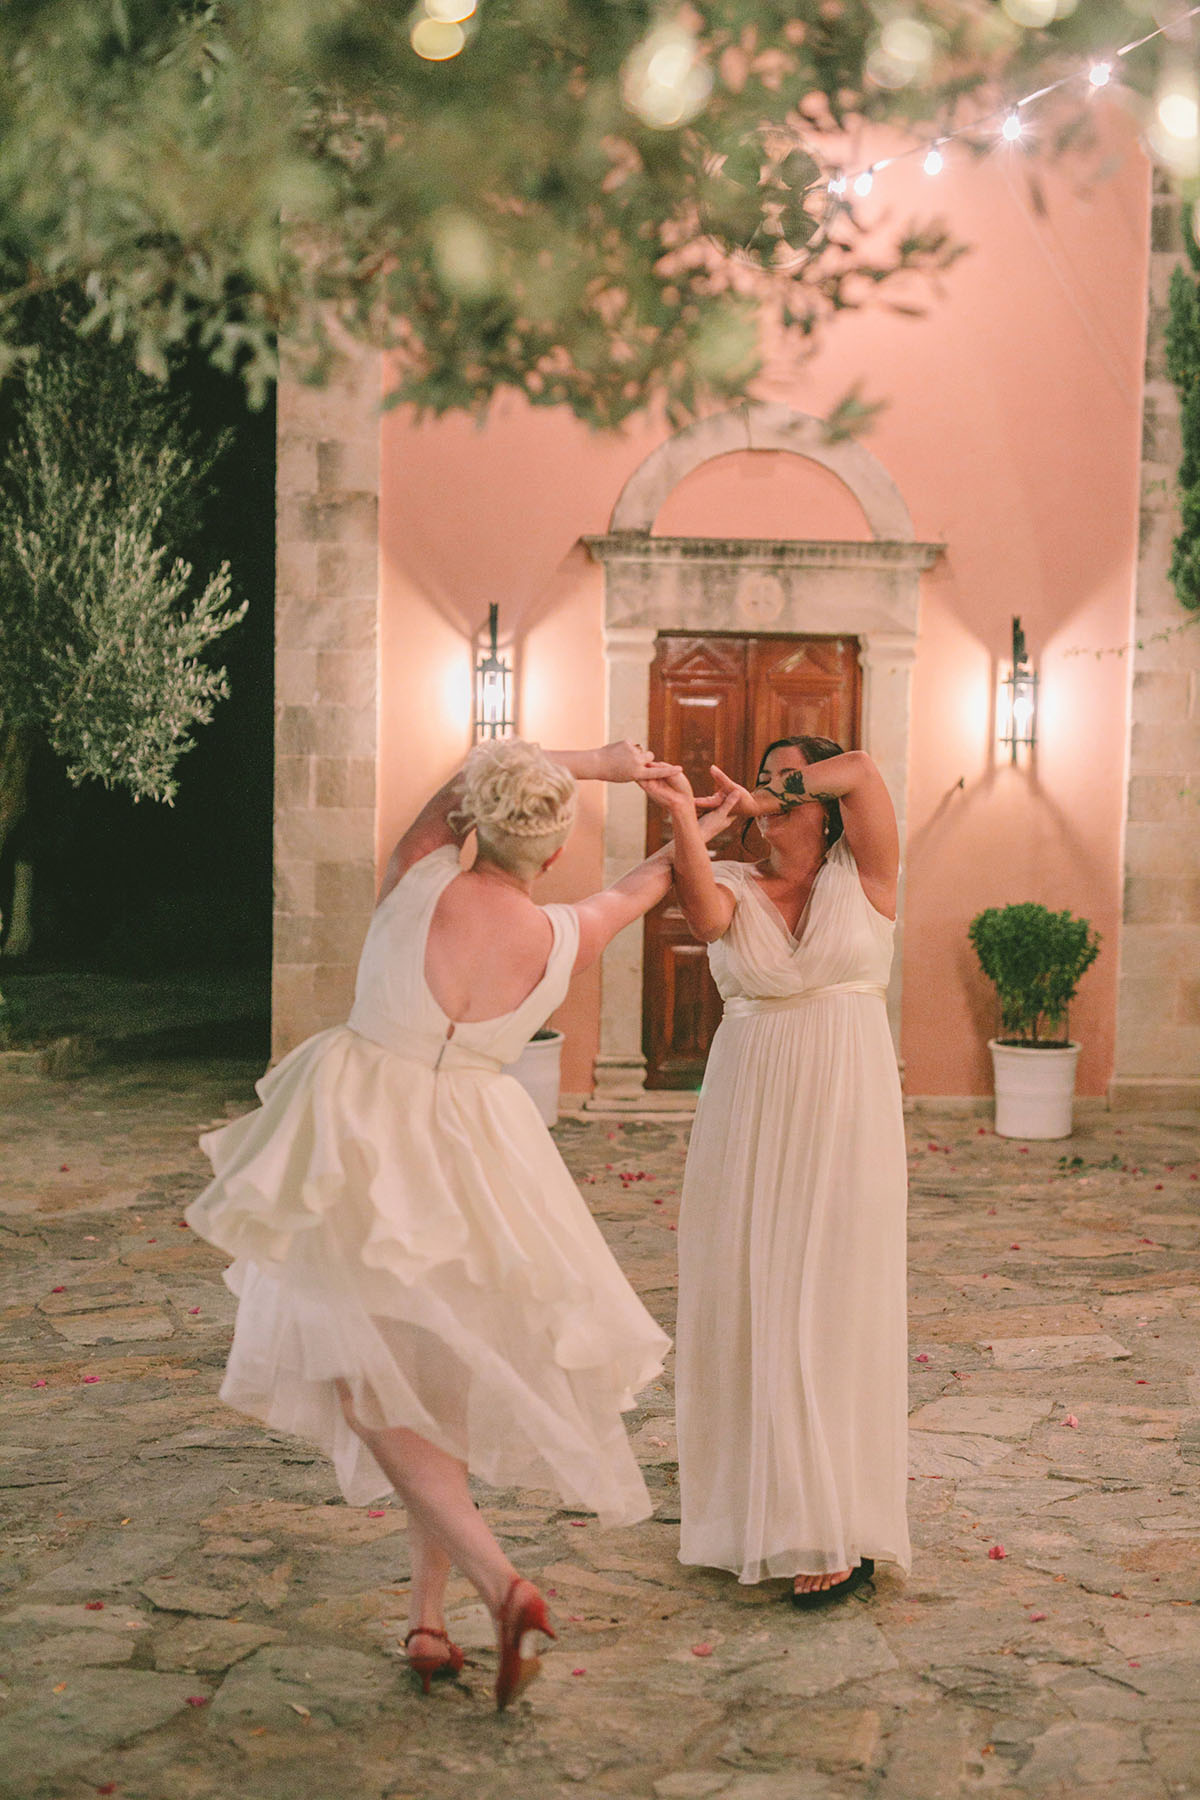 Natural beauty shines in luxury destination wedding in Crete, Greece two brides lesbian wedding nature outdoors greenery hills first dance